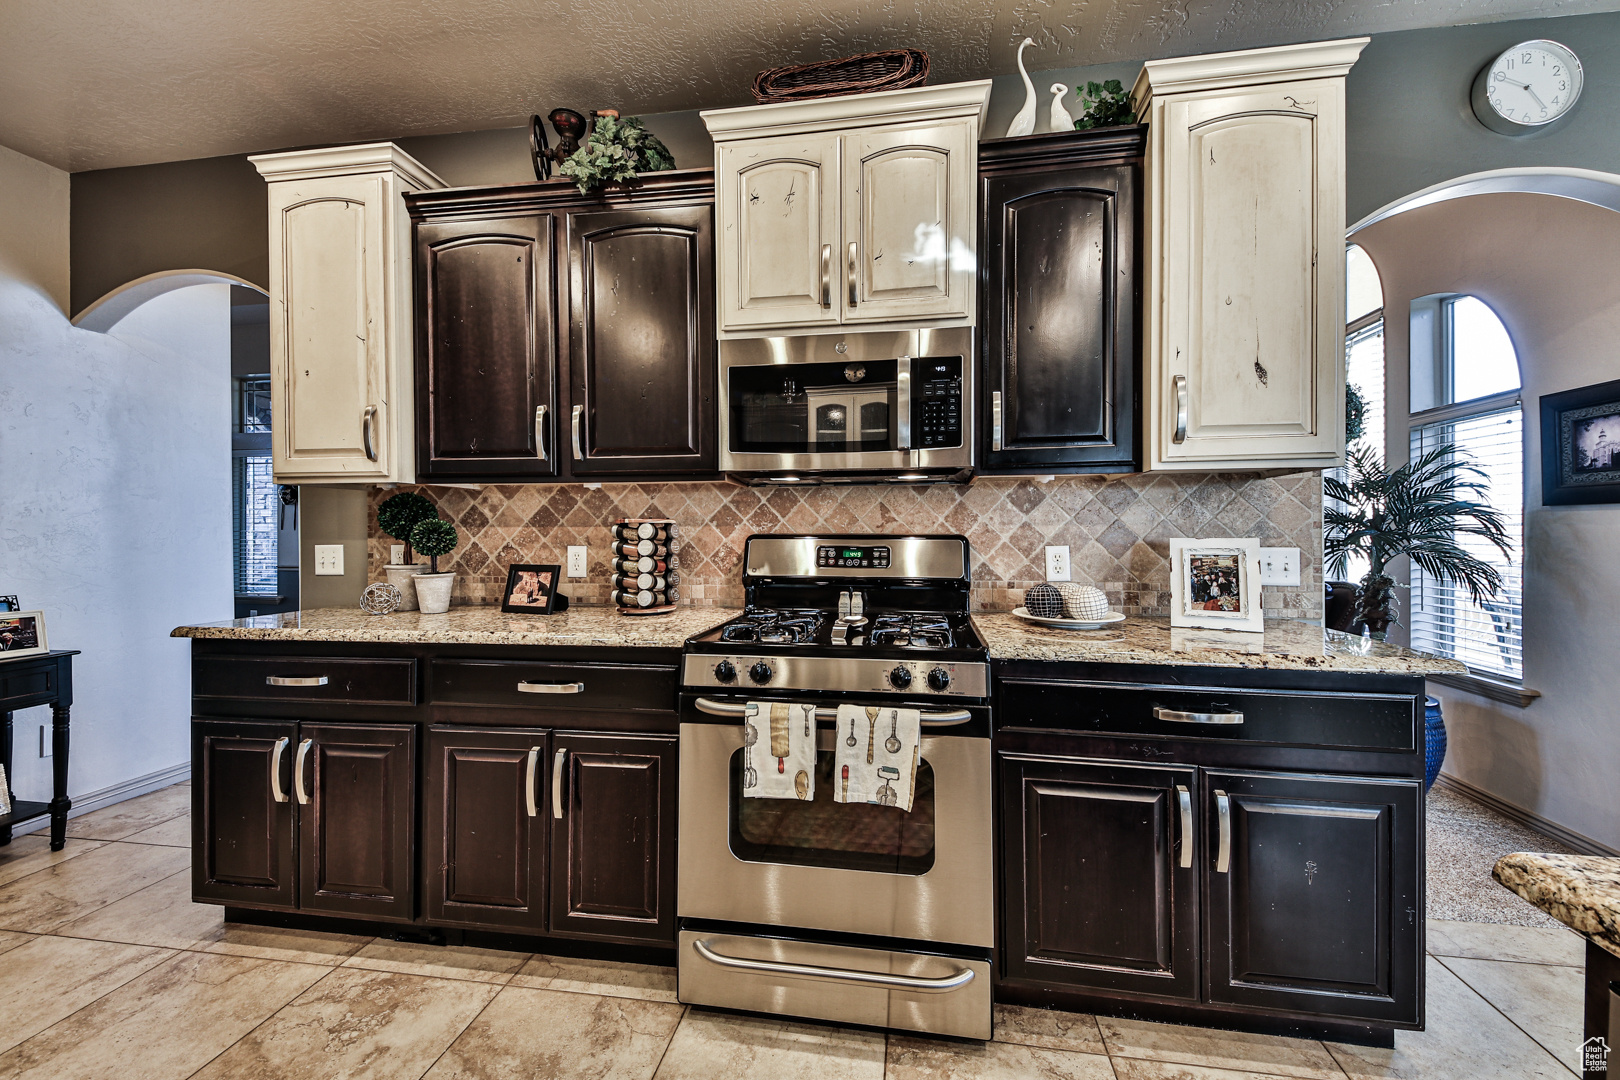 Kitchen with backsplash, appliances with stainless steel finishes, light stone countertops, and light tile flooring